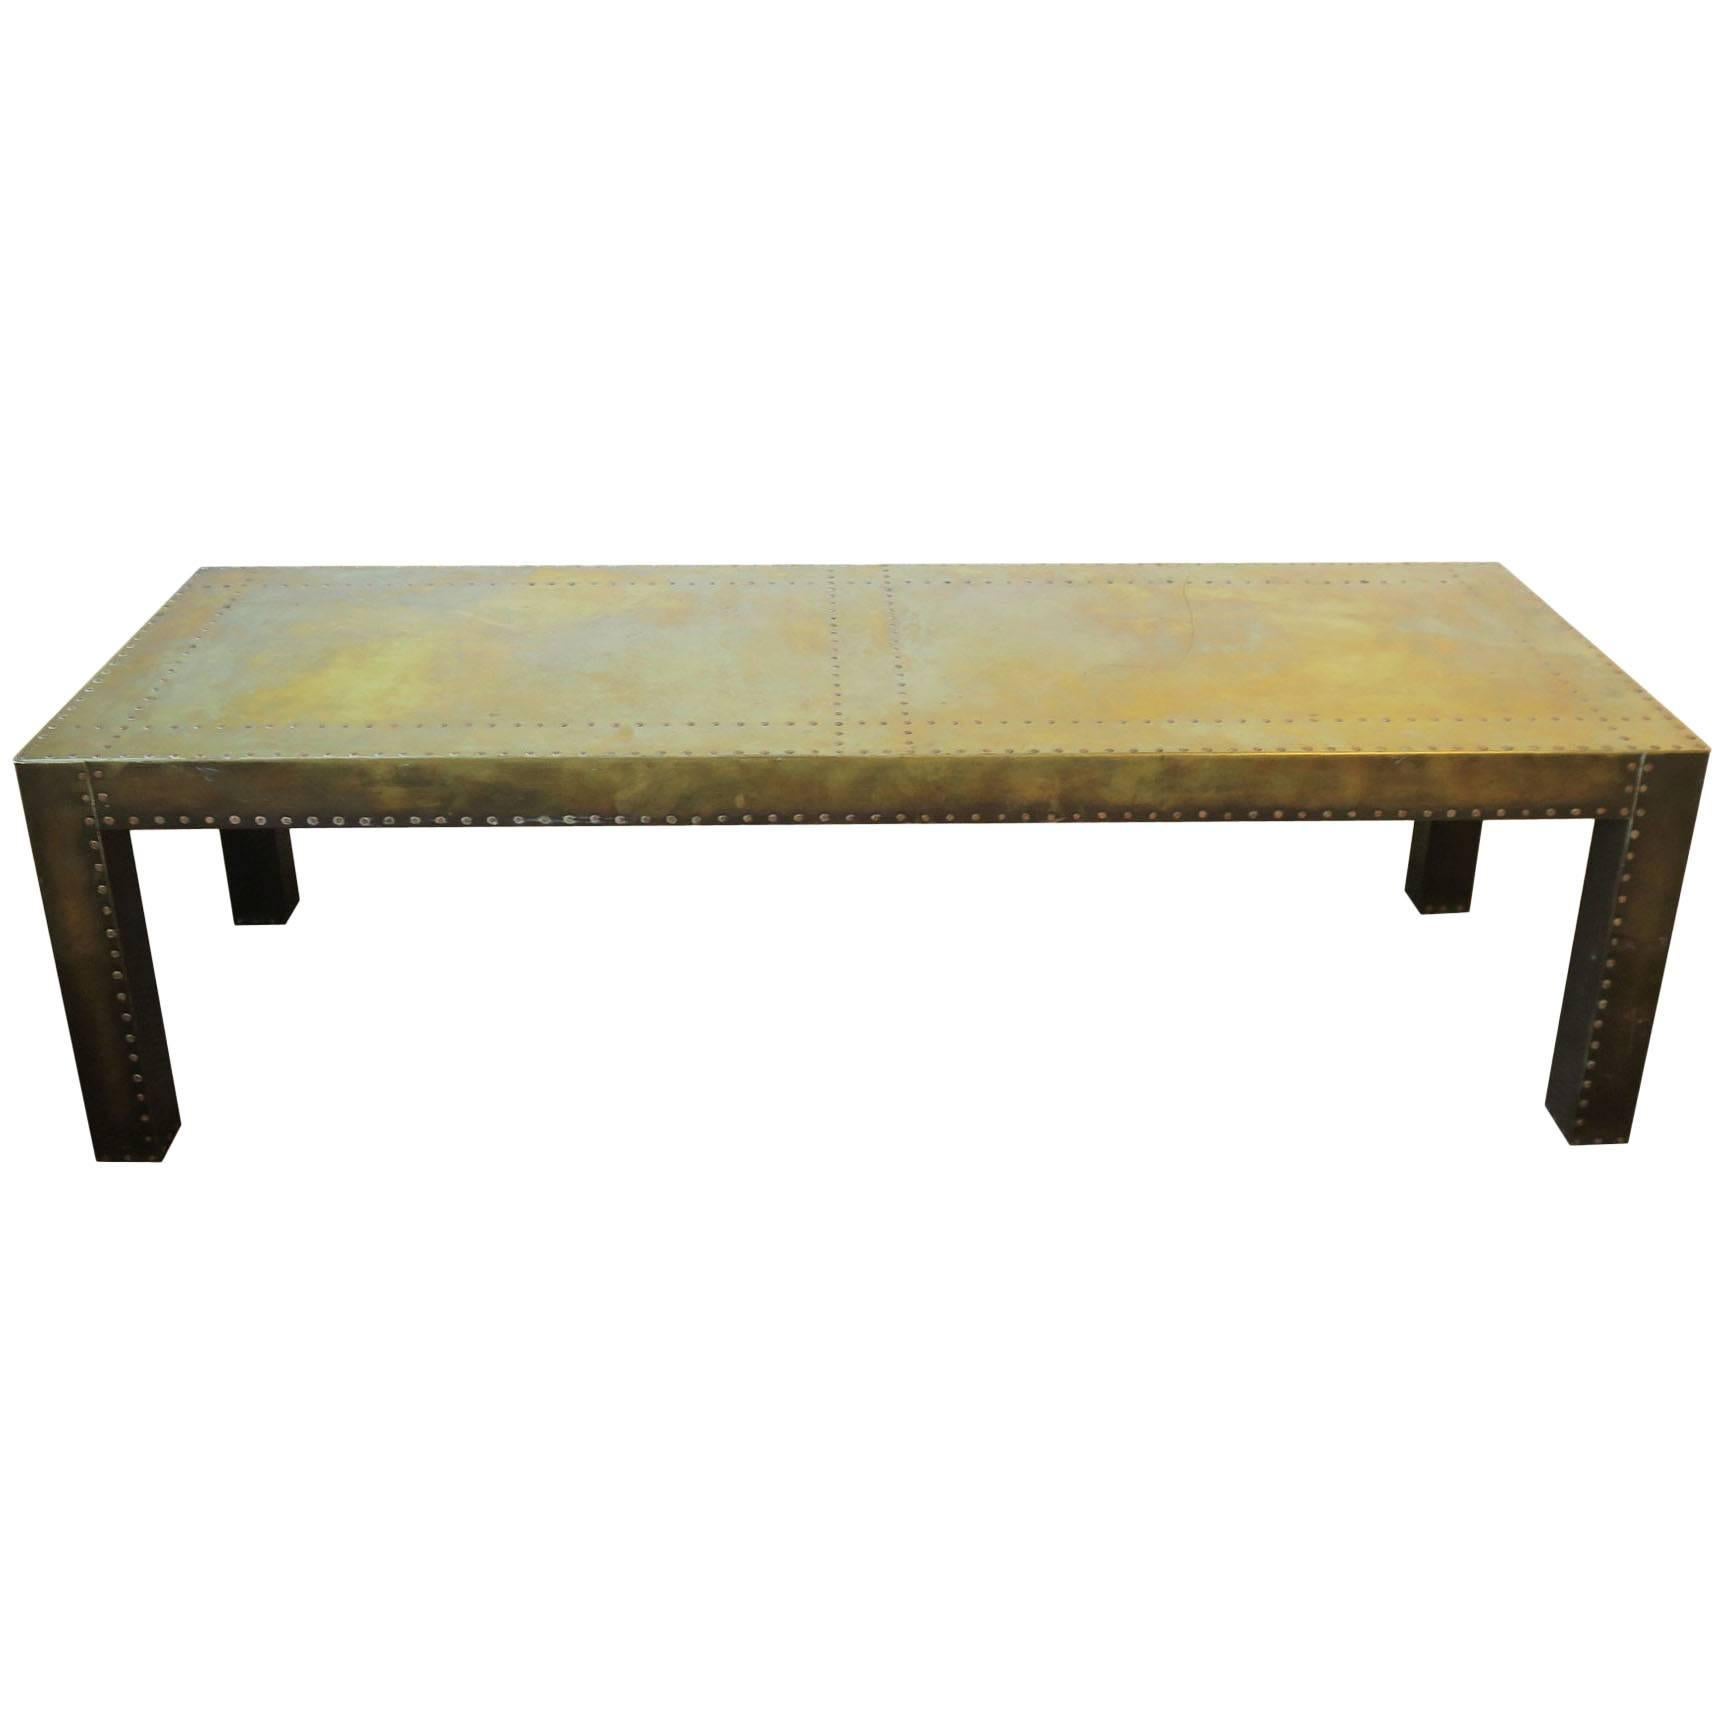 Brass Rectangular Coffee or Cocktail Table